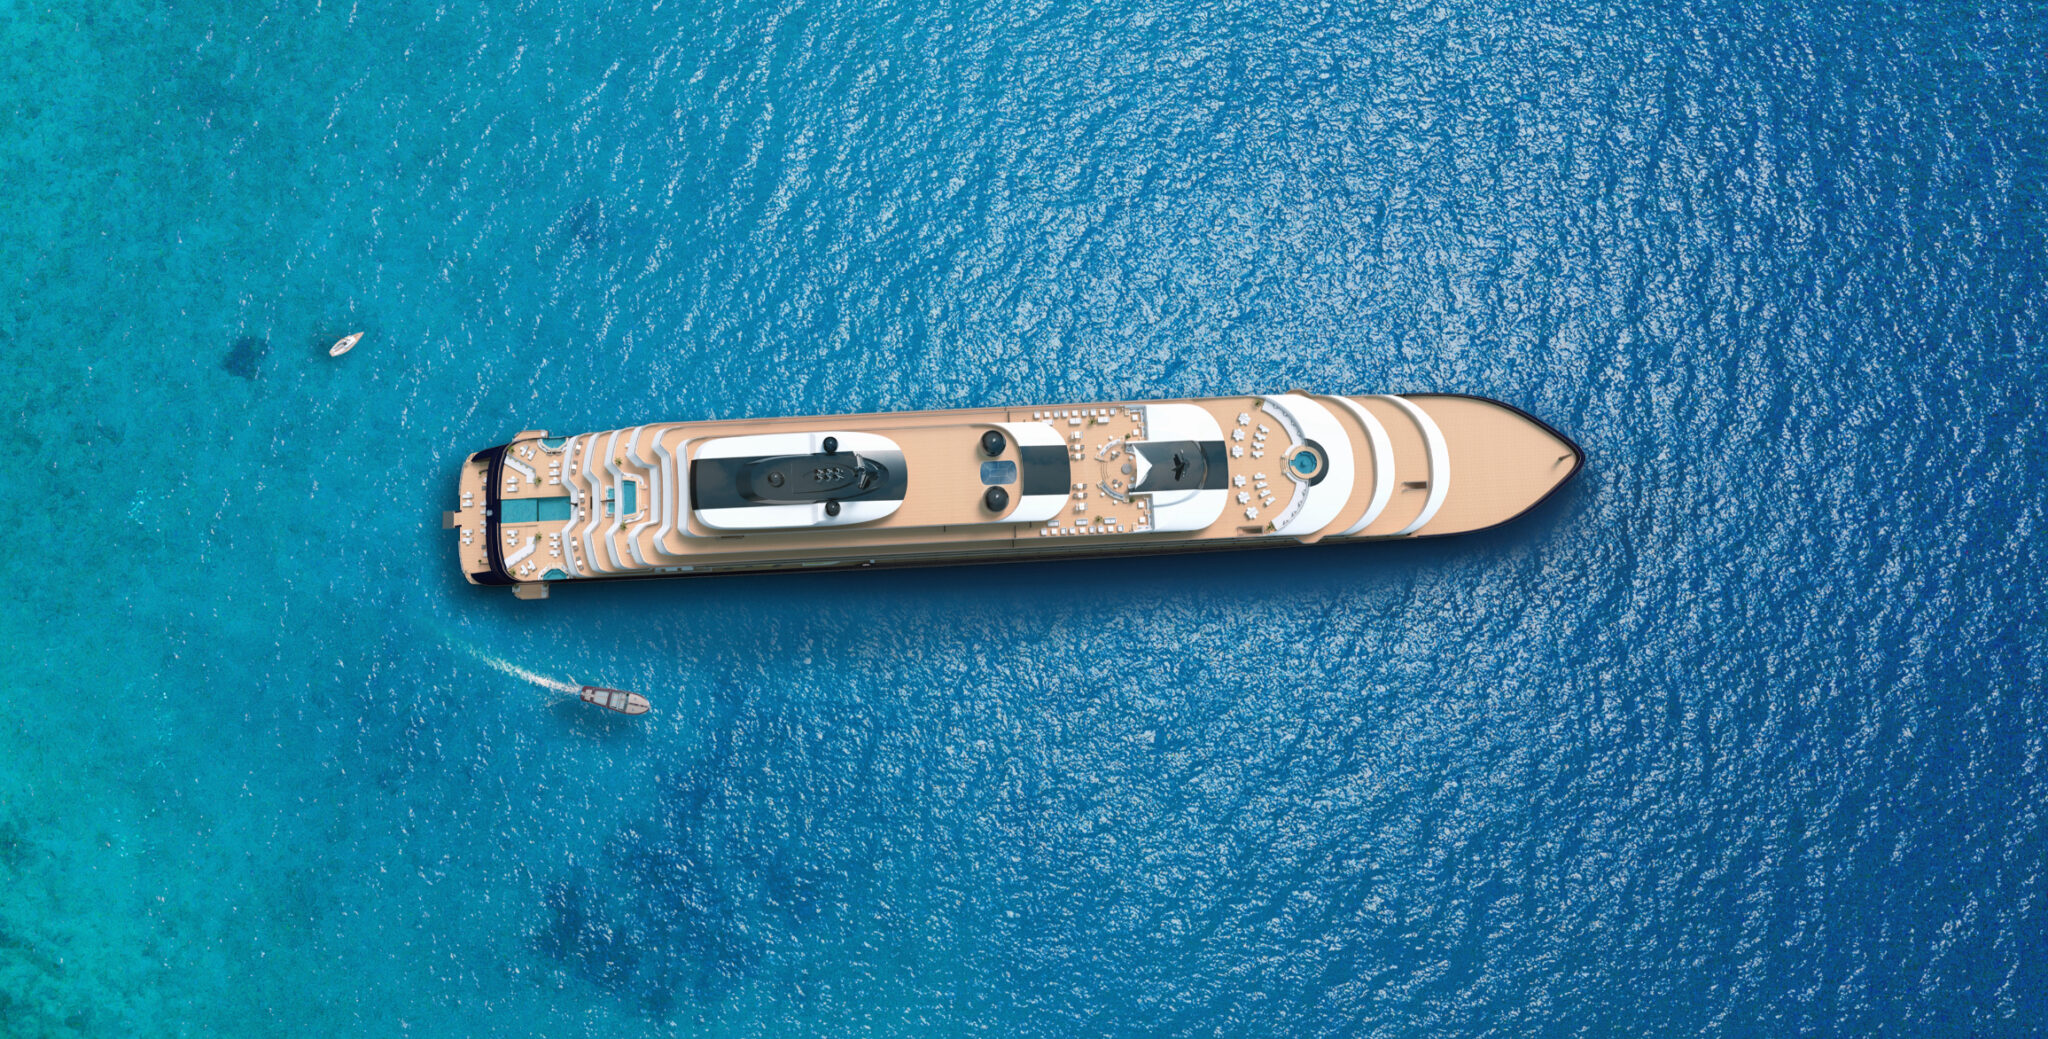 RCYC_Evrima_Yacht in destination_Top view_Angle_2